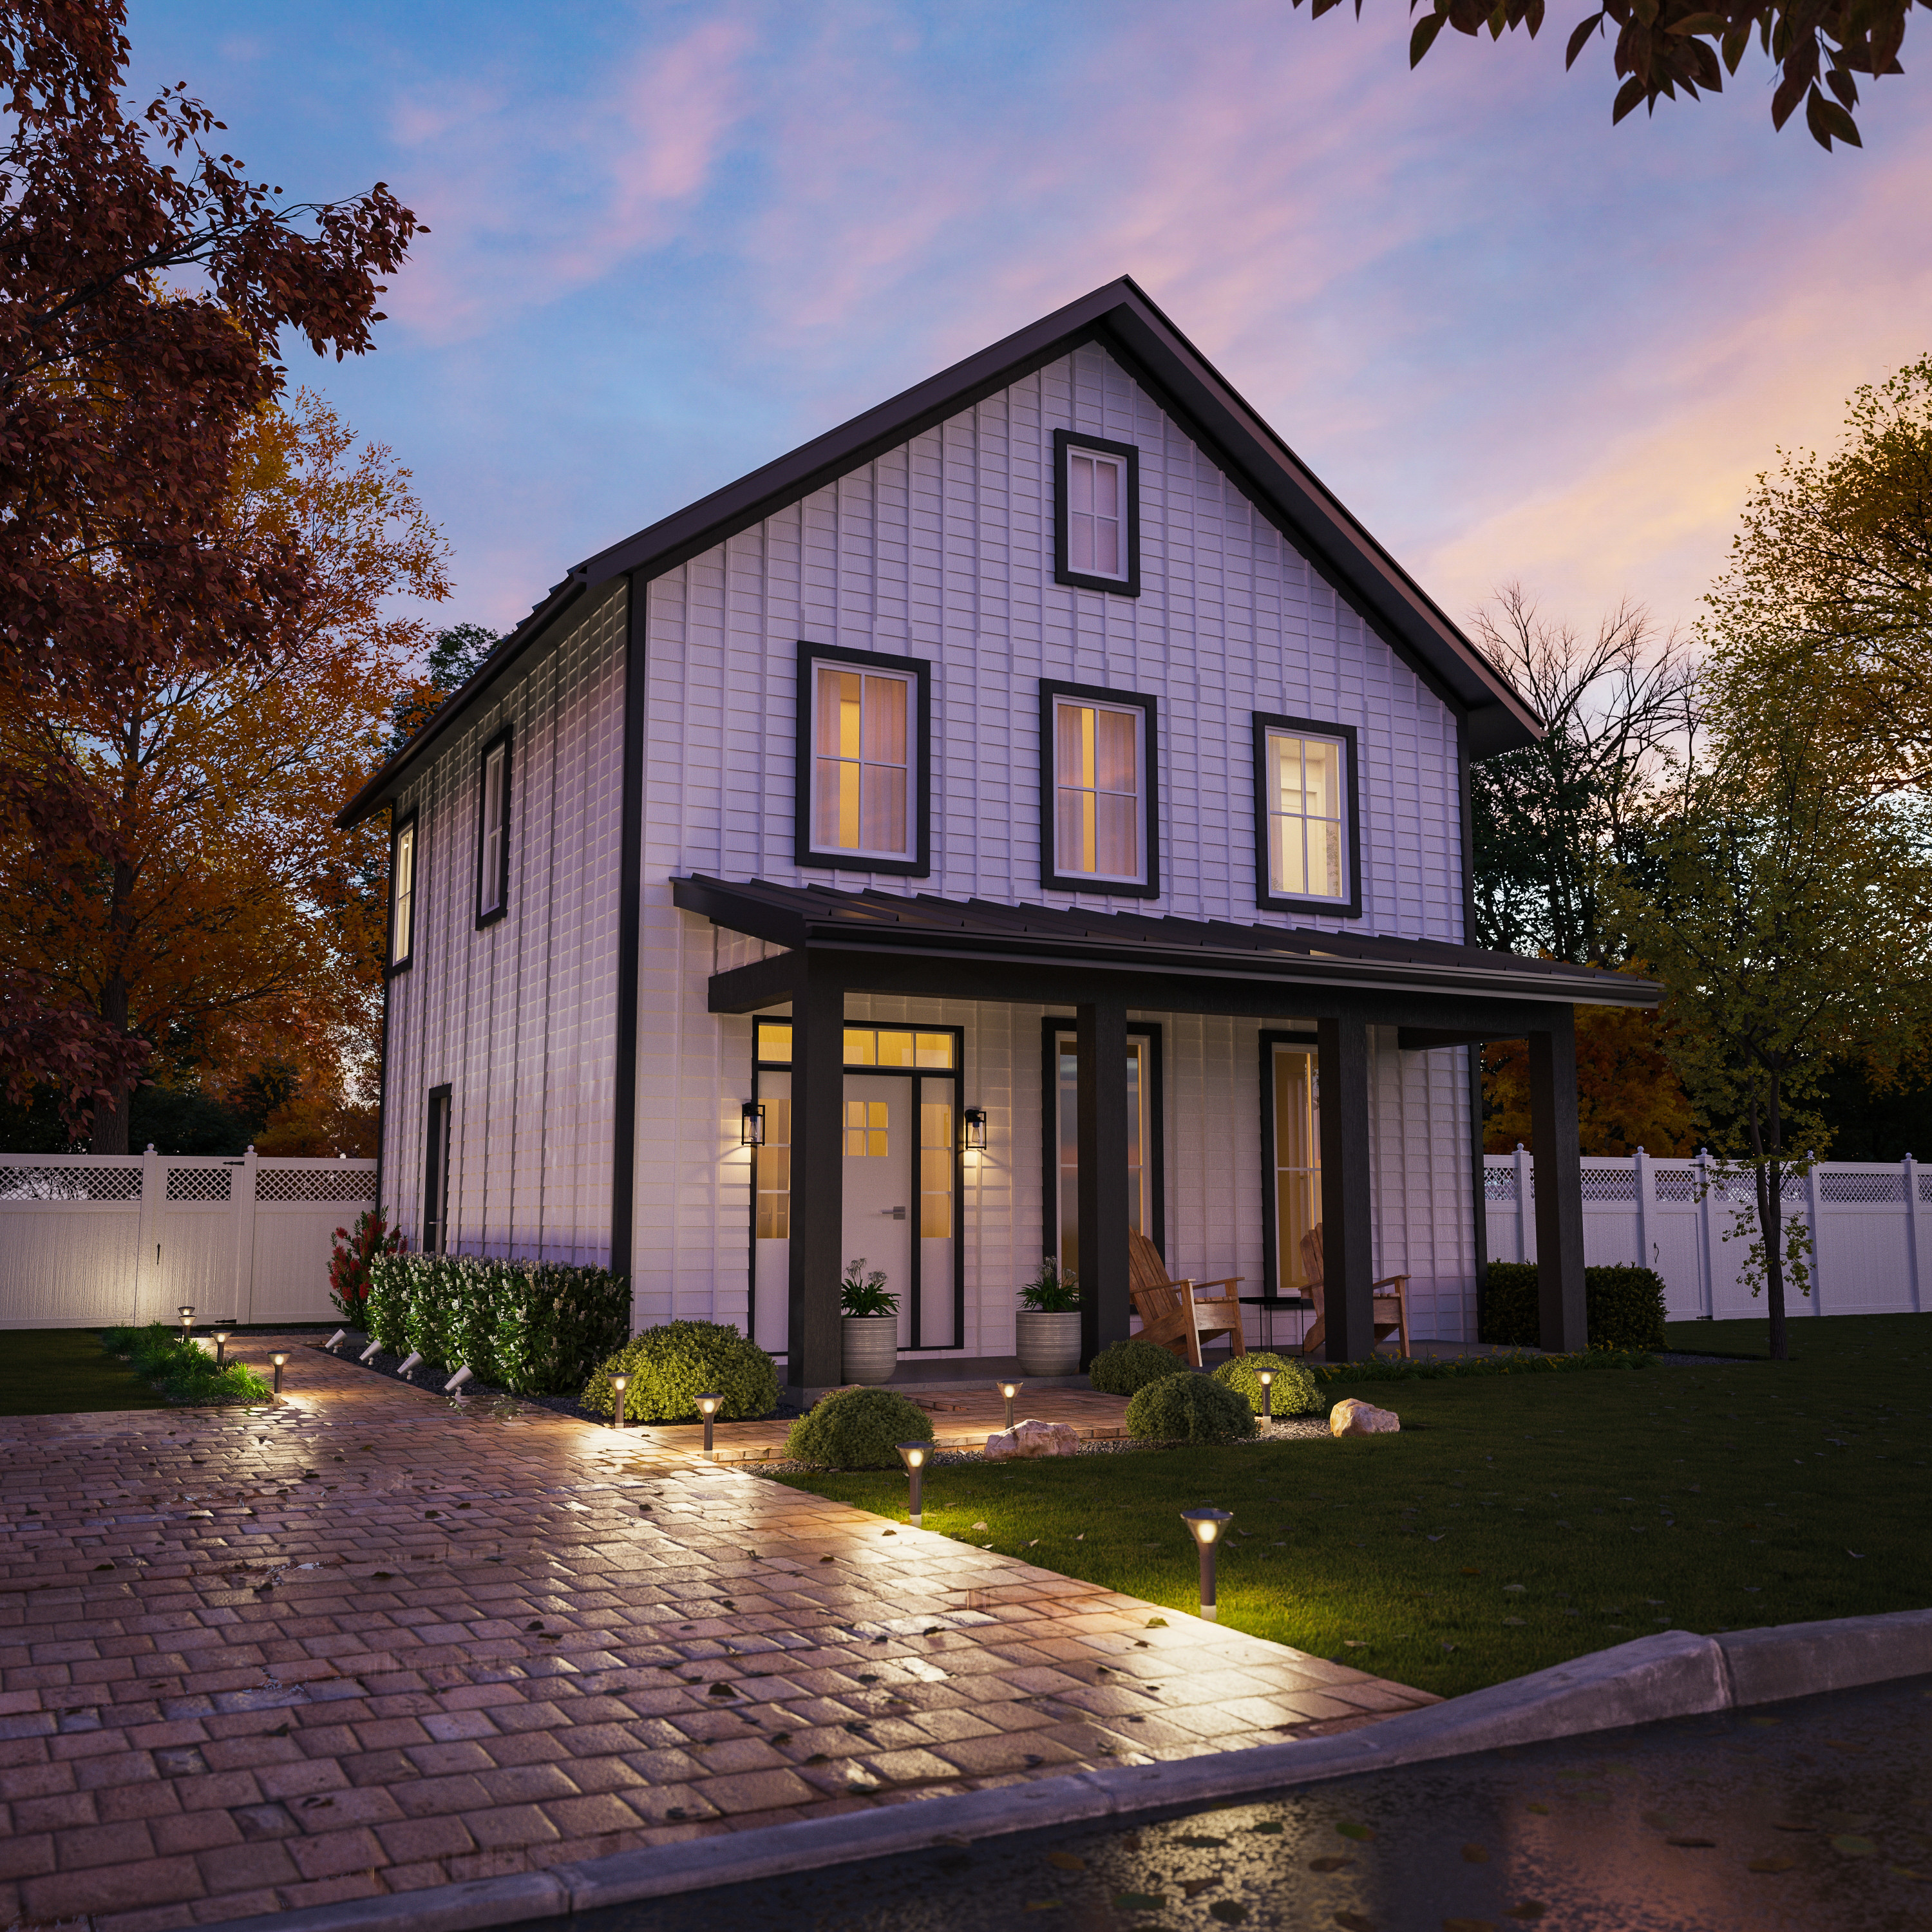 Exterior rendering of the house